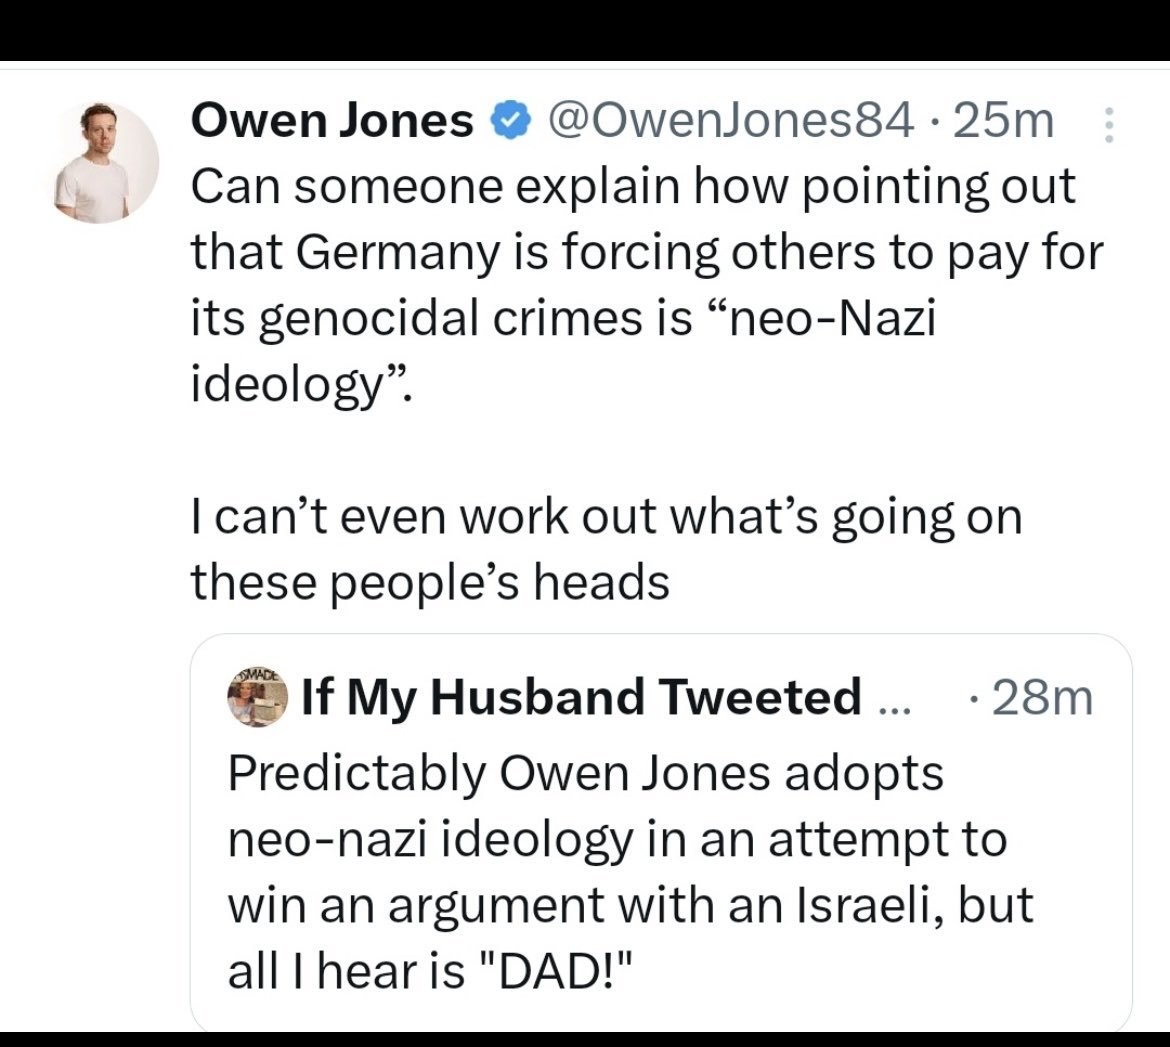 Owen Jones does not know what’s going on in other people’s heads. But we know what’s going on in Owen Jones’ head